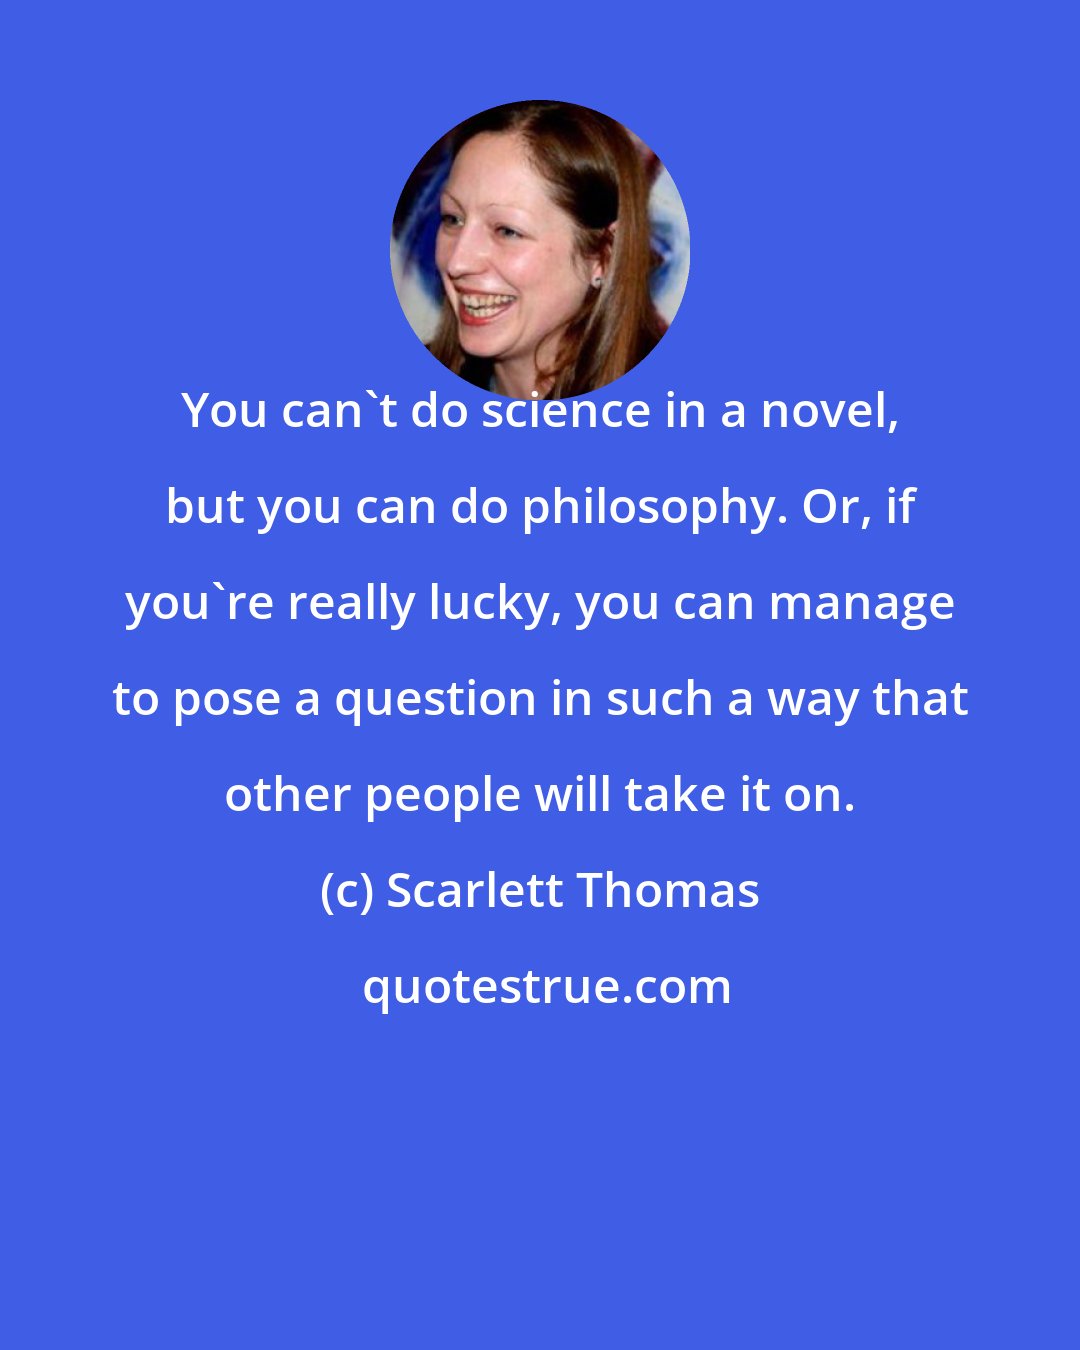 Scarlett Thomas: You can't do science in a novel, but you can do philosophy. Or, if you're really lucky, you can manage to pose a question in such a way that other people will take it on.